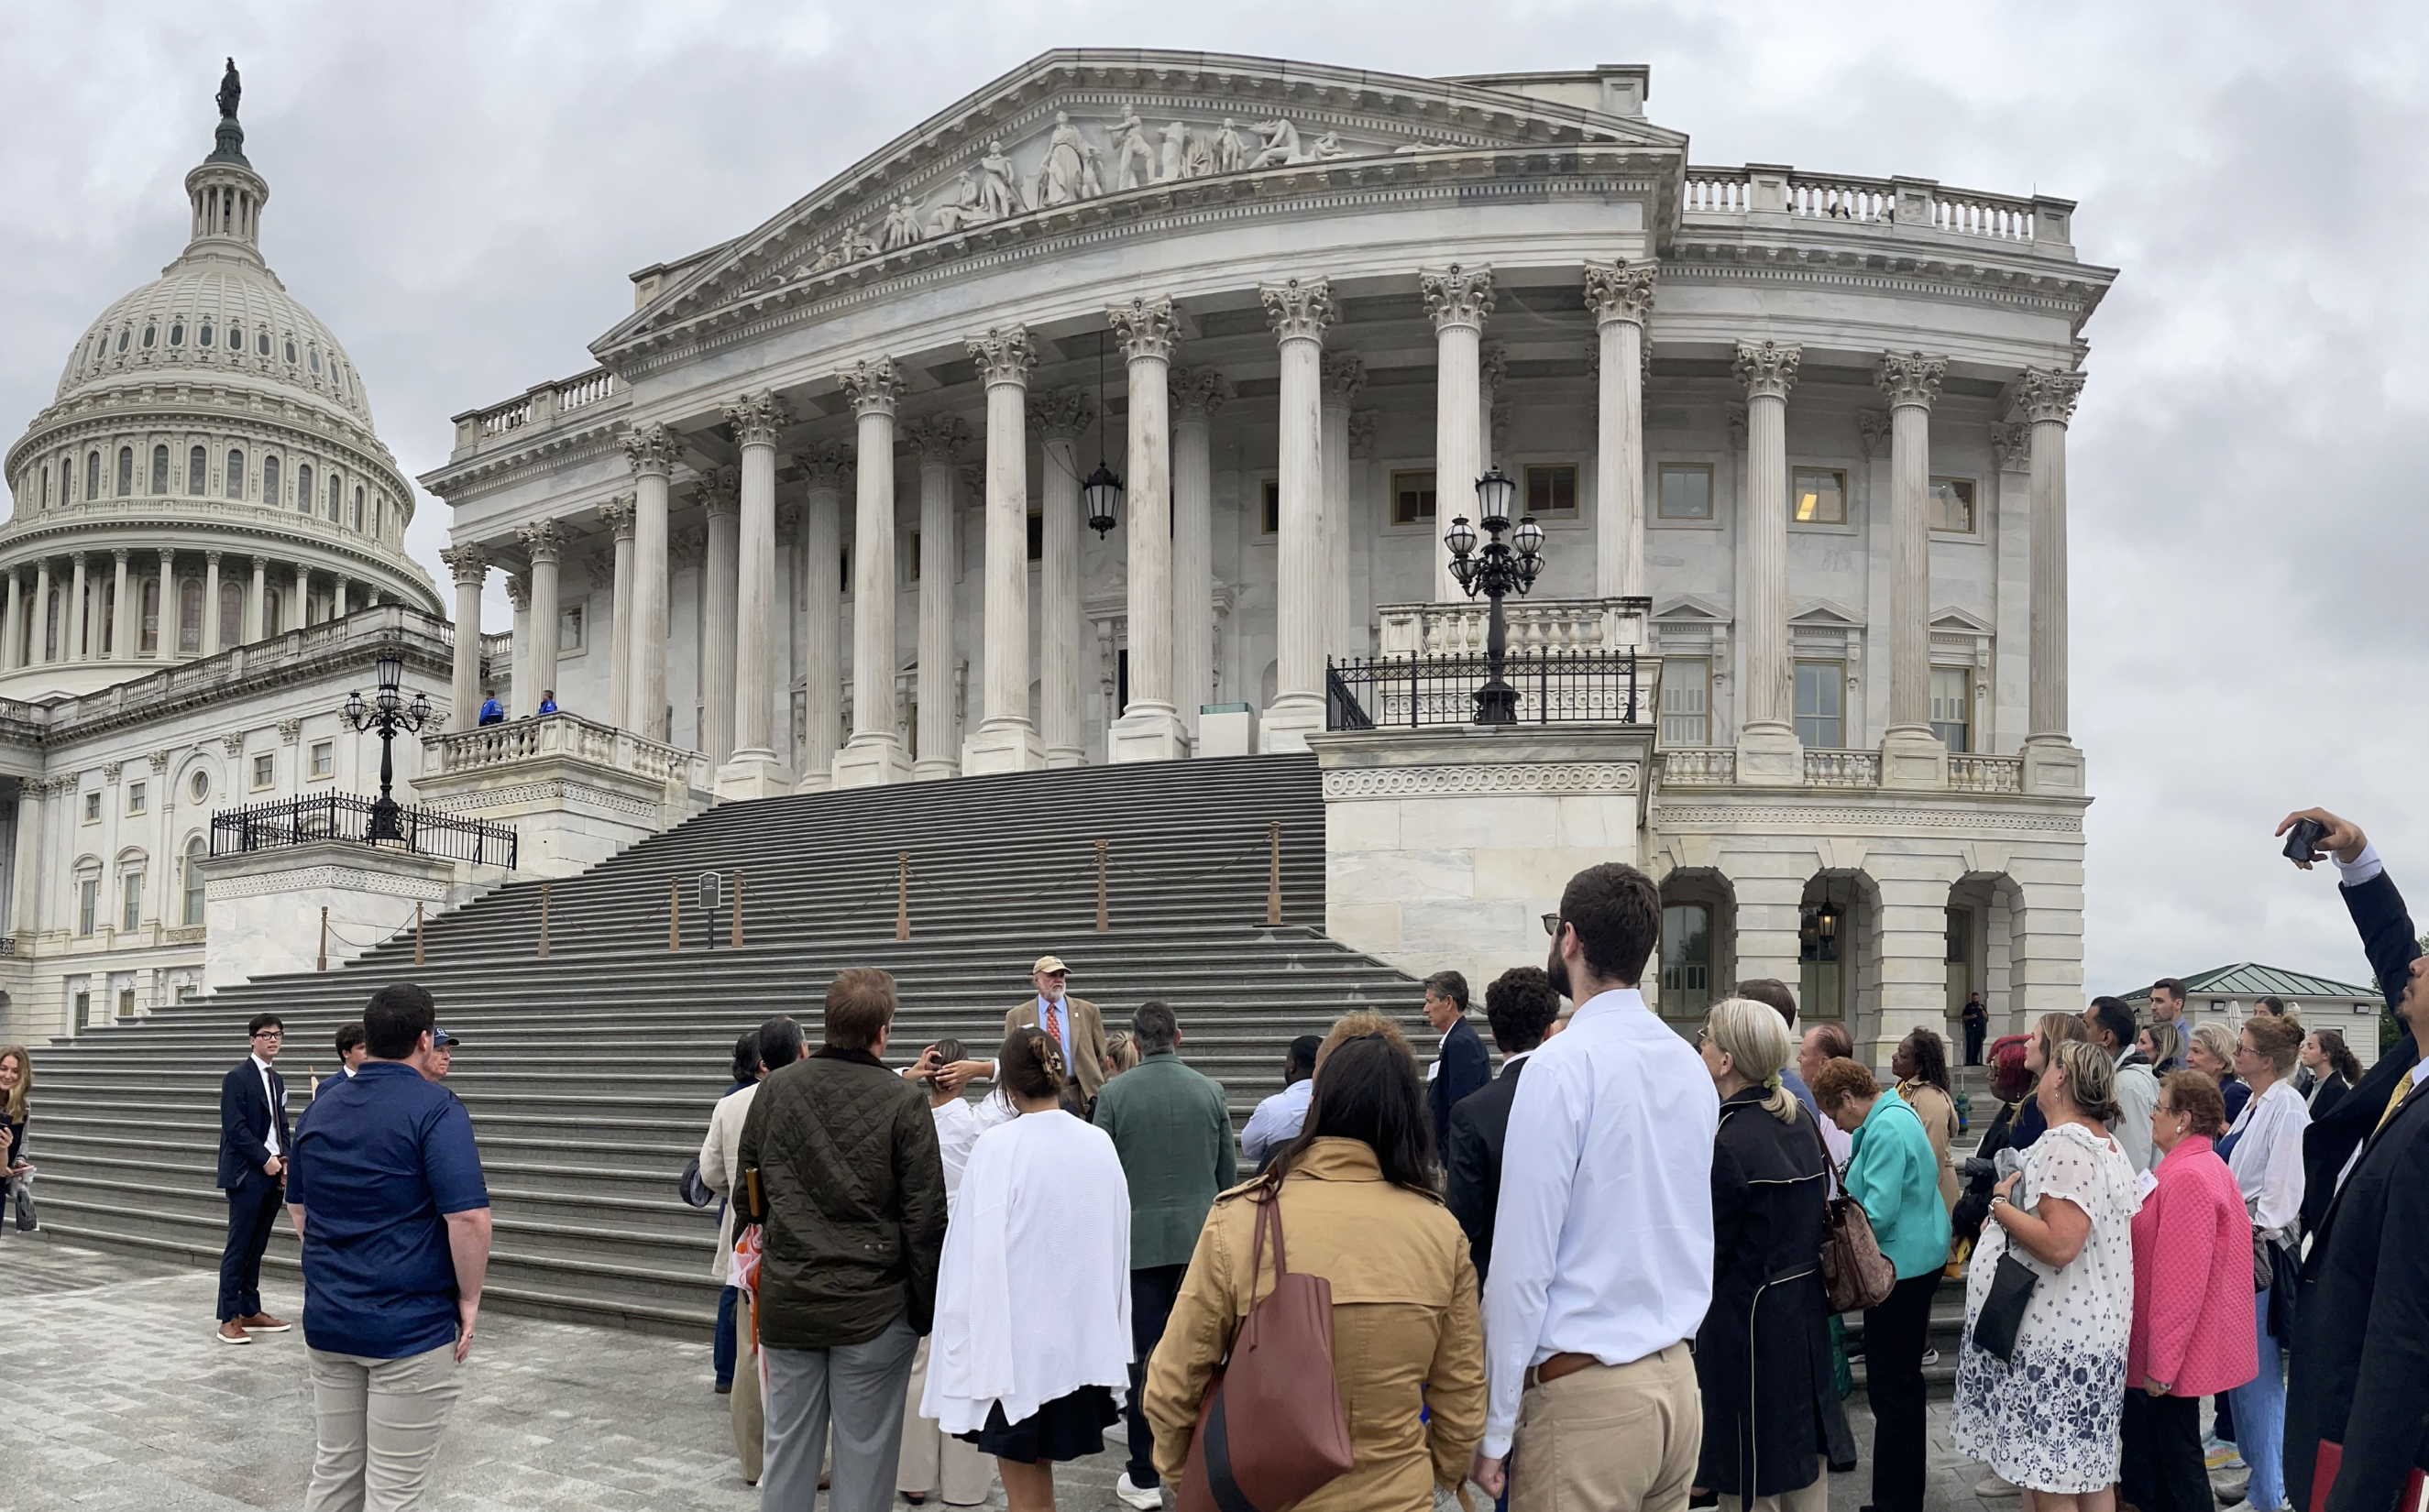 capitol tours today